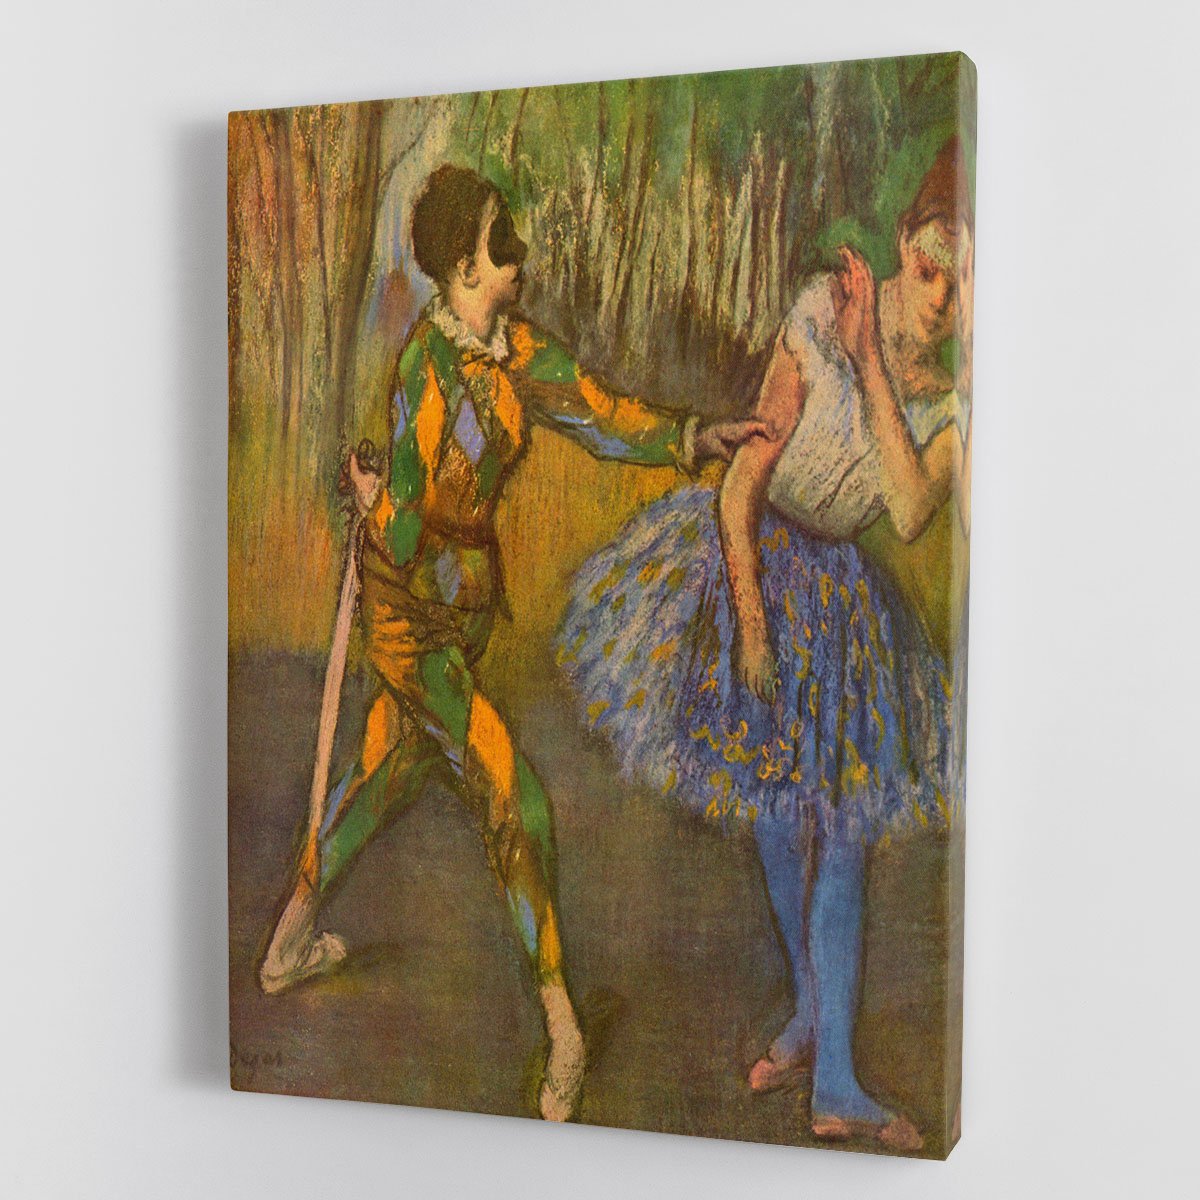 Harlequin and Columbine by Degas Canvas Print or Poster